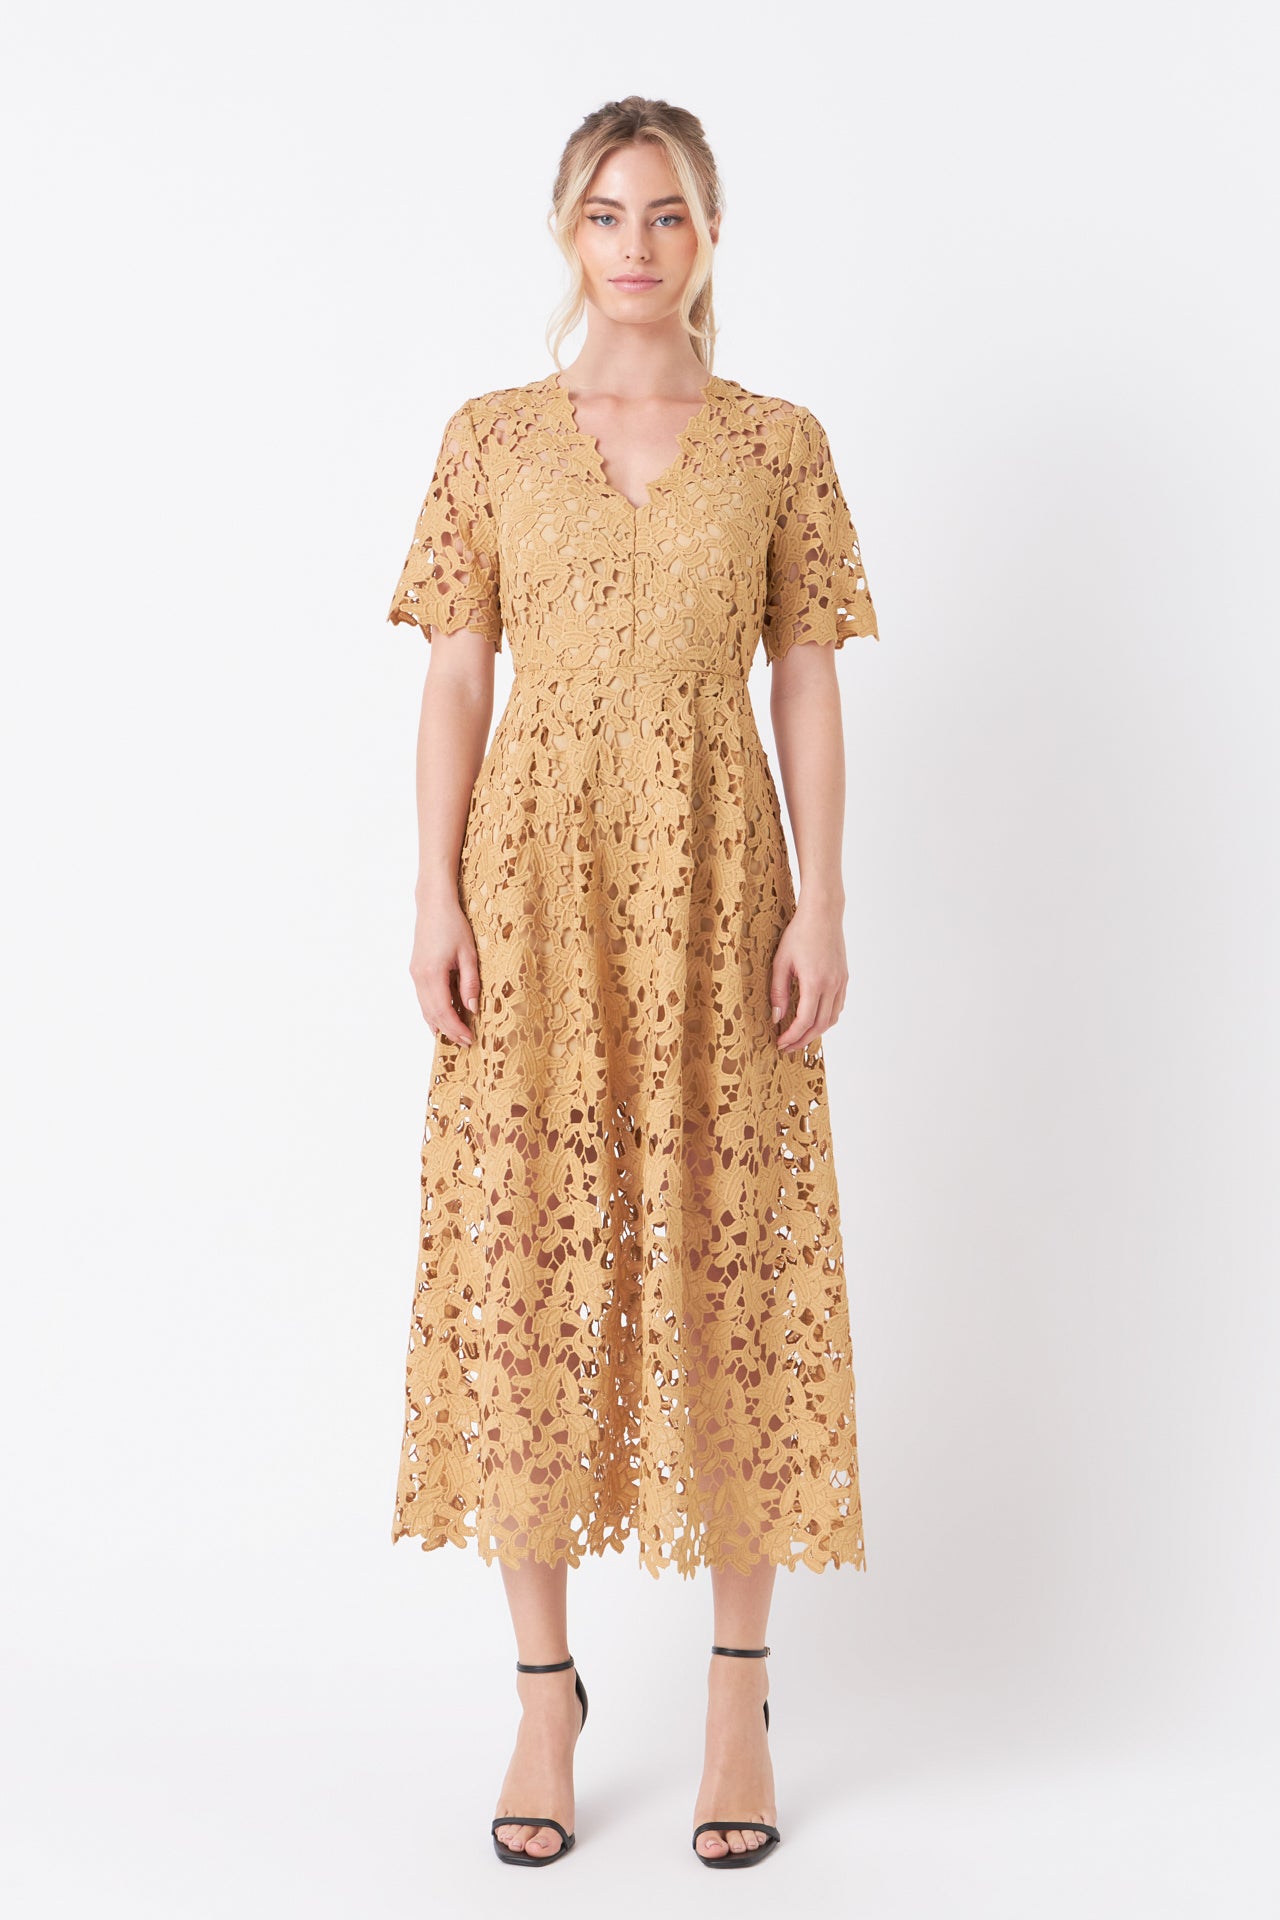 tambere cora dress - floral - MTH